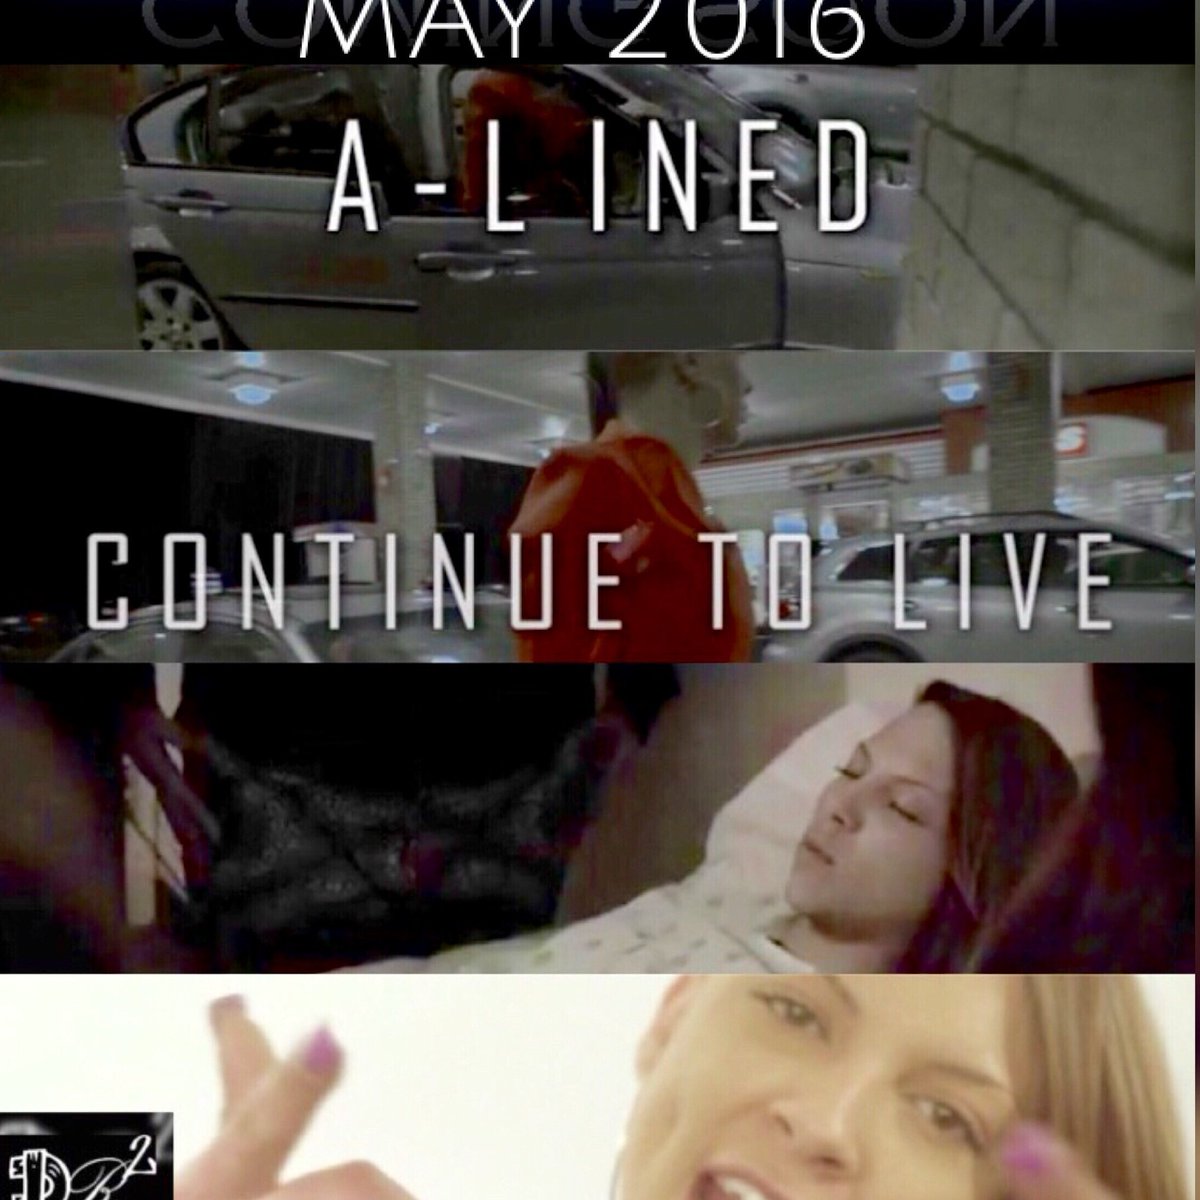 OFFICIAL VIDEO AND SINGLE @ALINED26 'CONTINUE TO LIVE' MAY 2016  #Alined #ContinueToLive #SINGLE #OFFICIALVIDEO